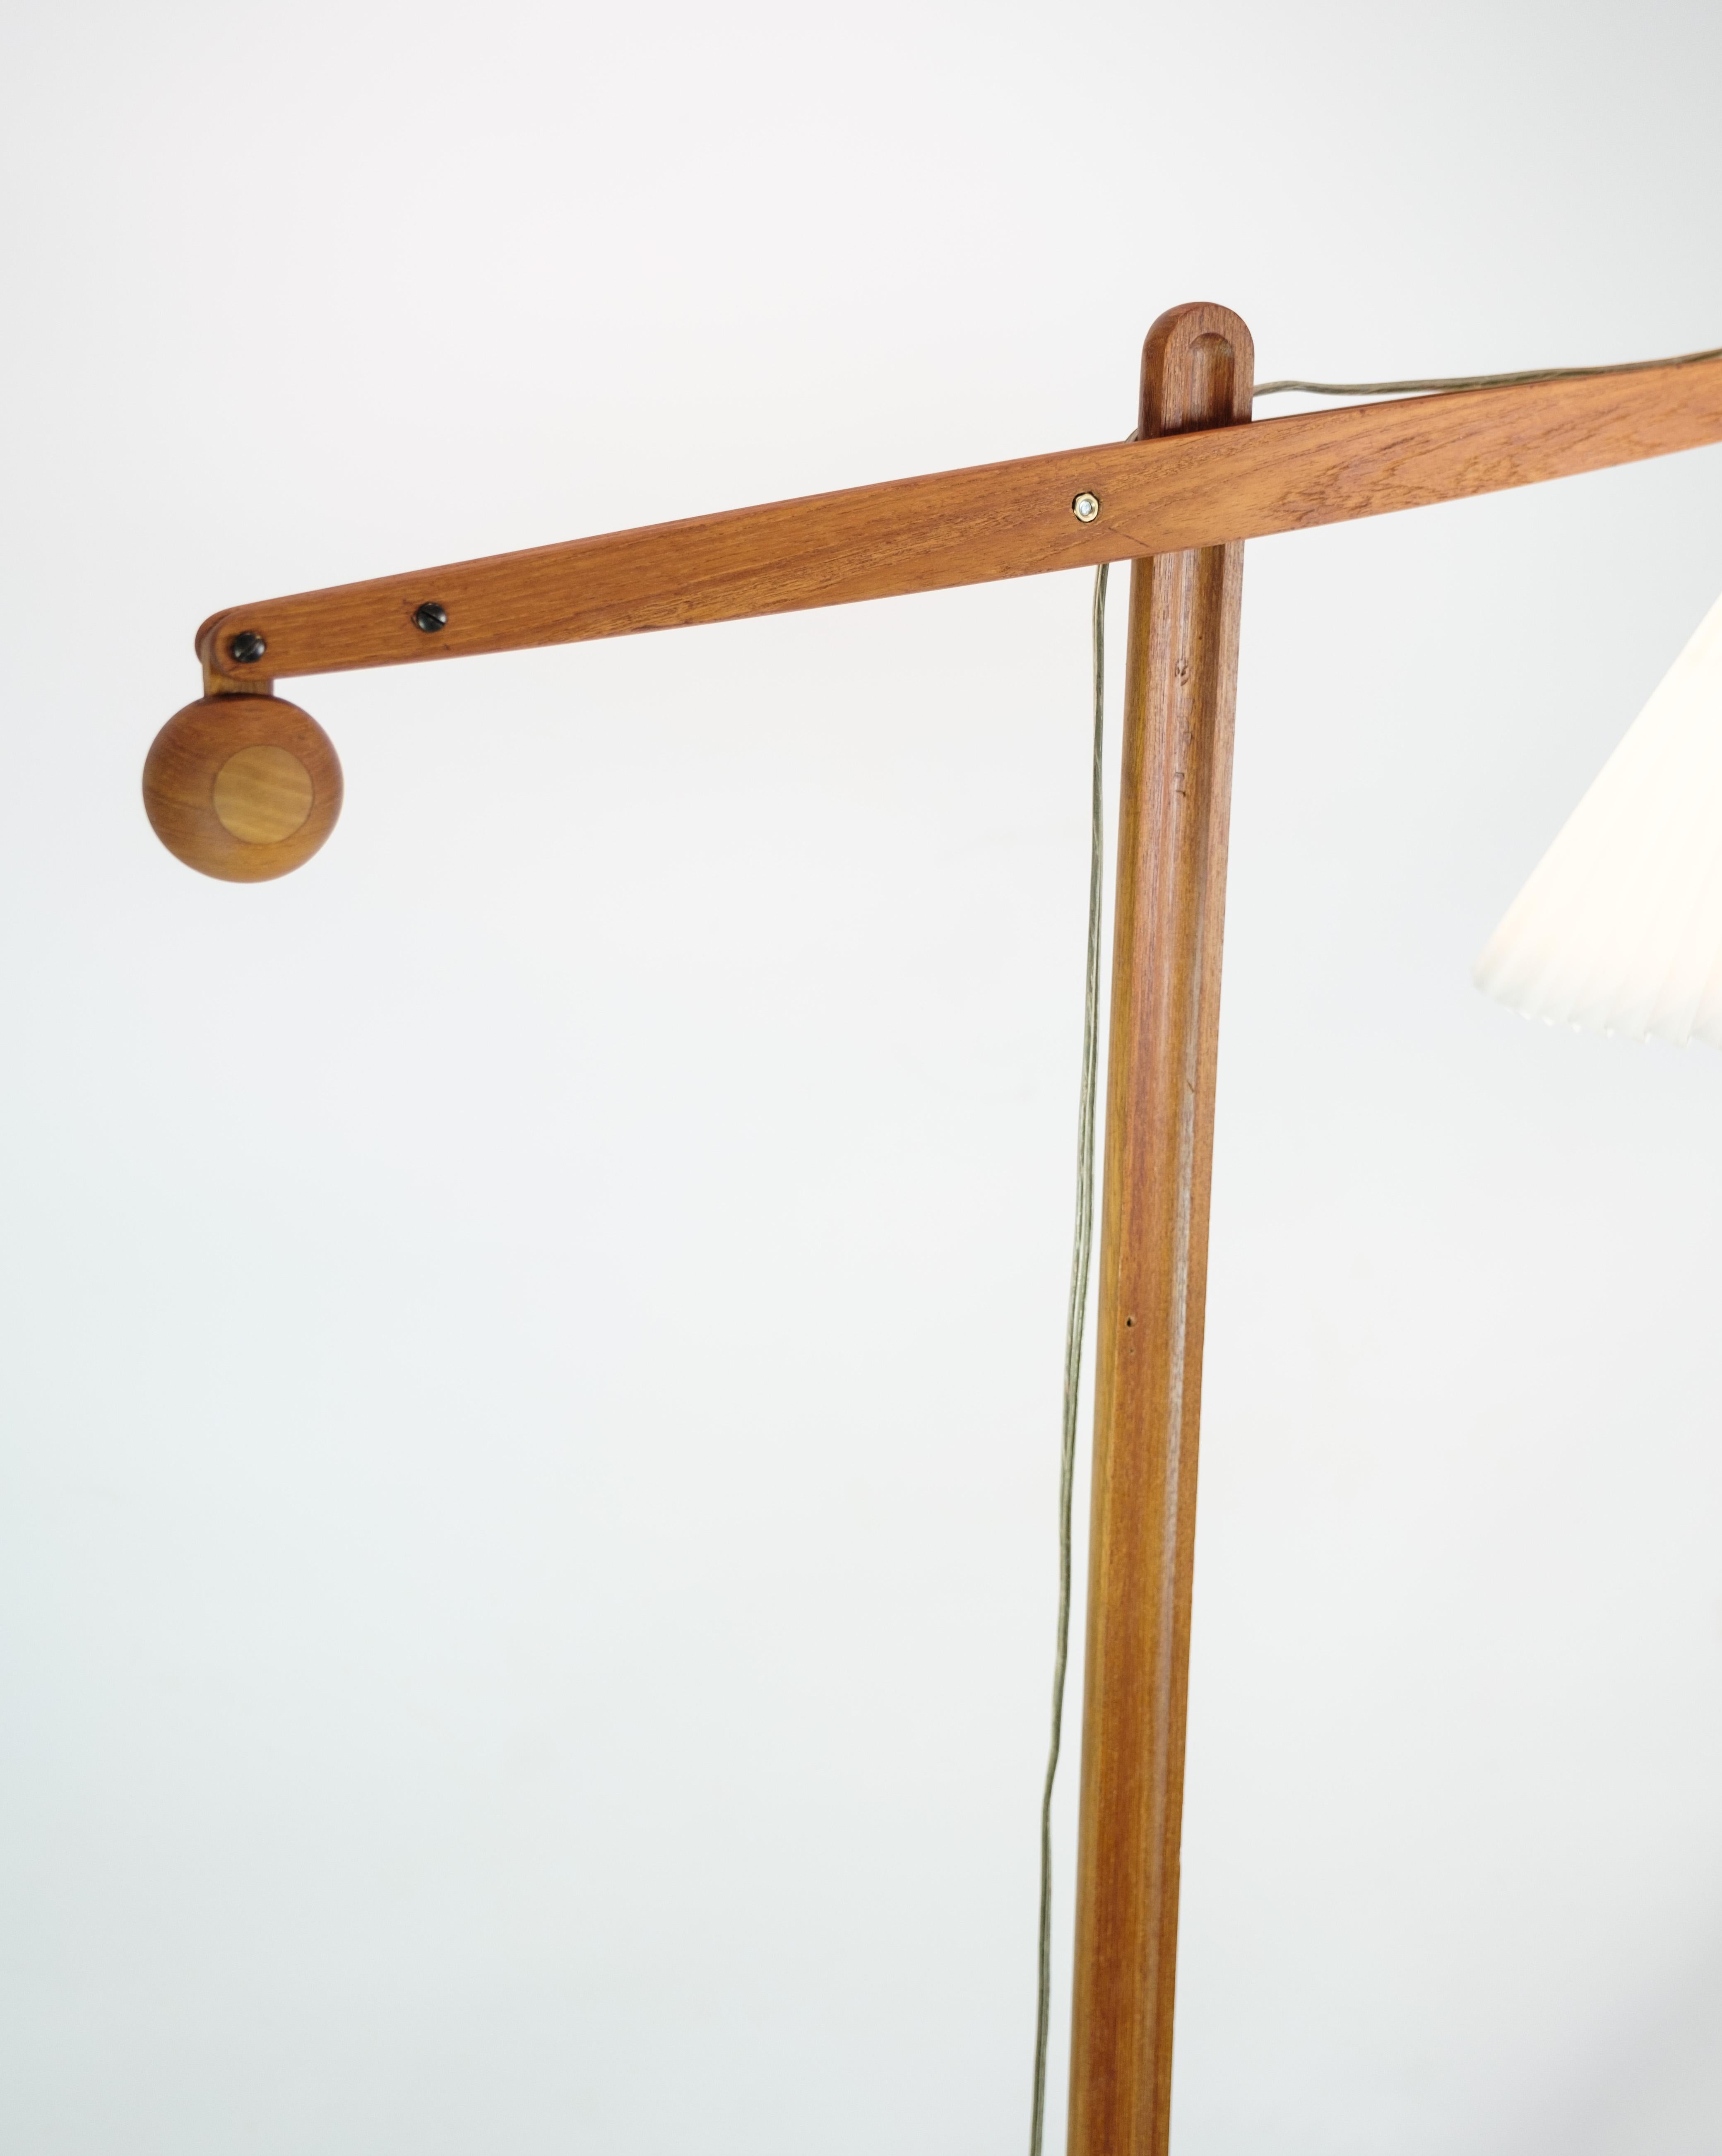 Floor lamp, model 325 by Le Klint, designed by Vilhelm Wohlert in teak wood with original shade from around the 1950s, Denmark
H:150 W:65 Dia: 30